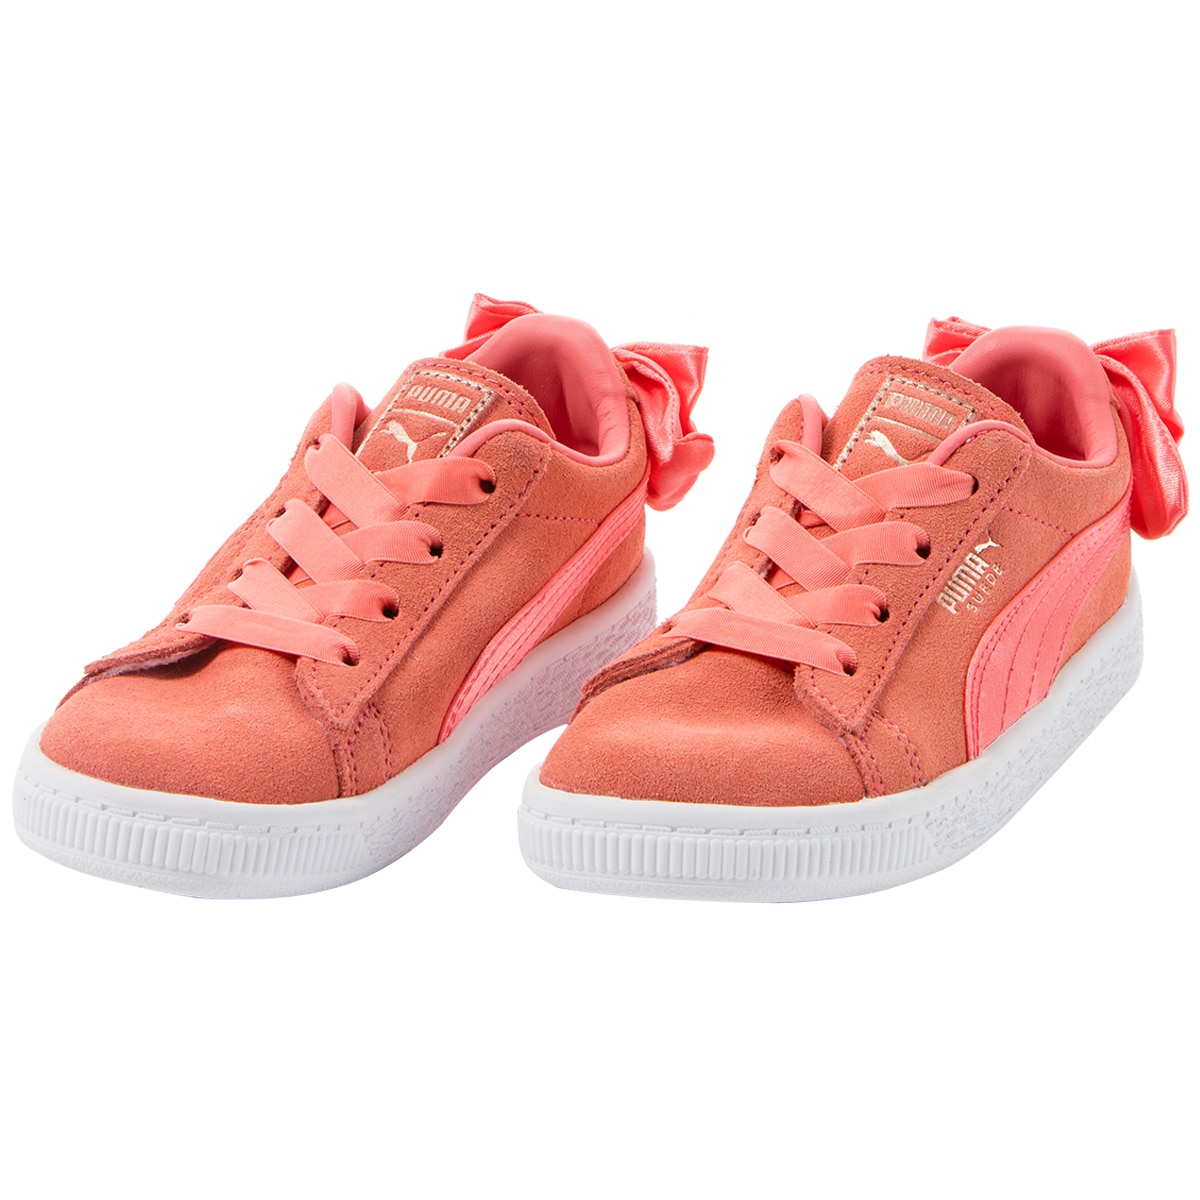 Puma Infant Suede Bow Shoe Shell Pink 